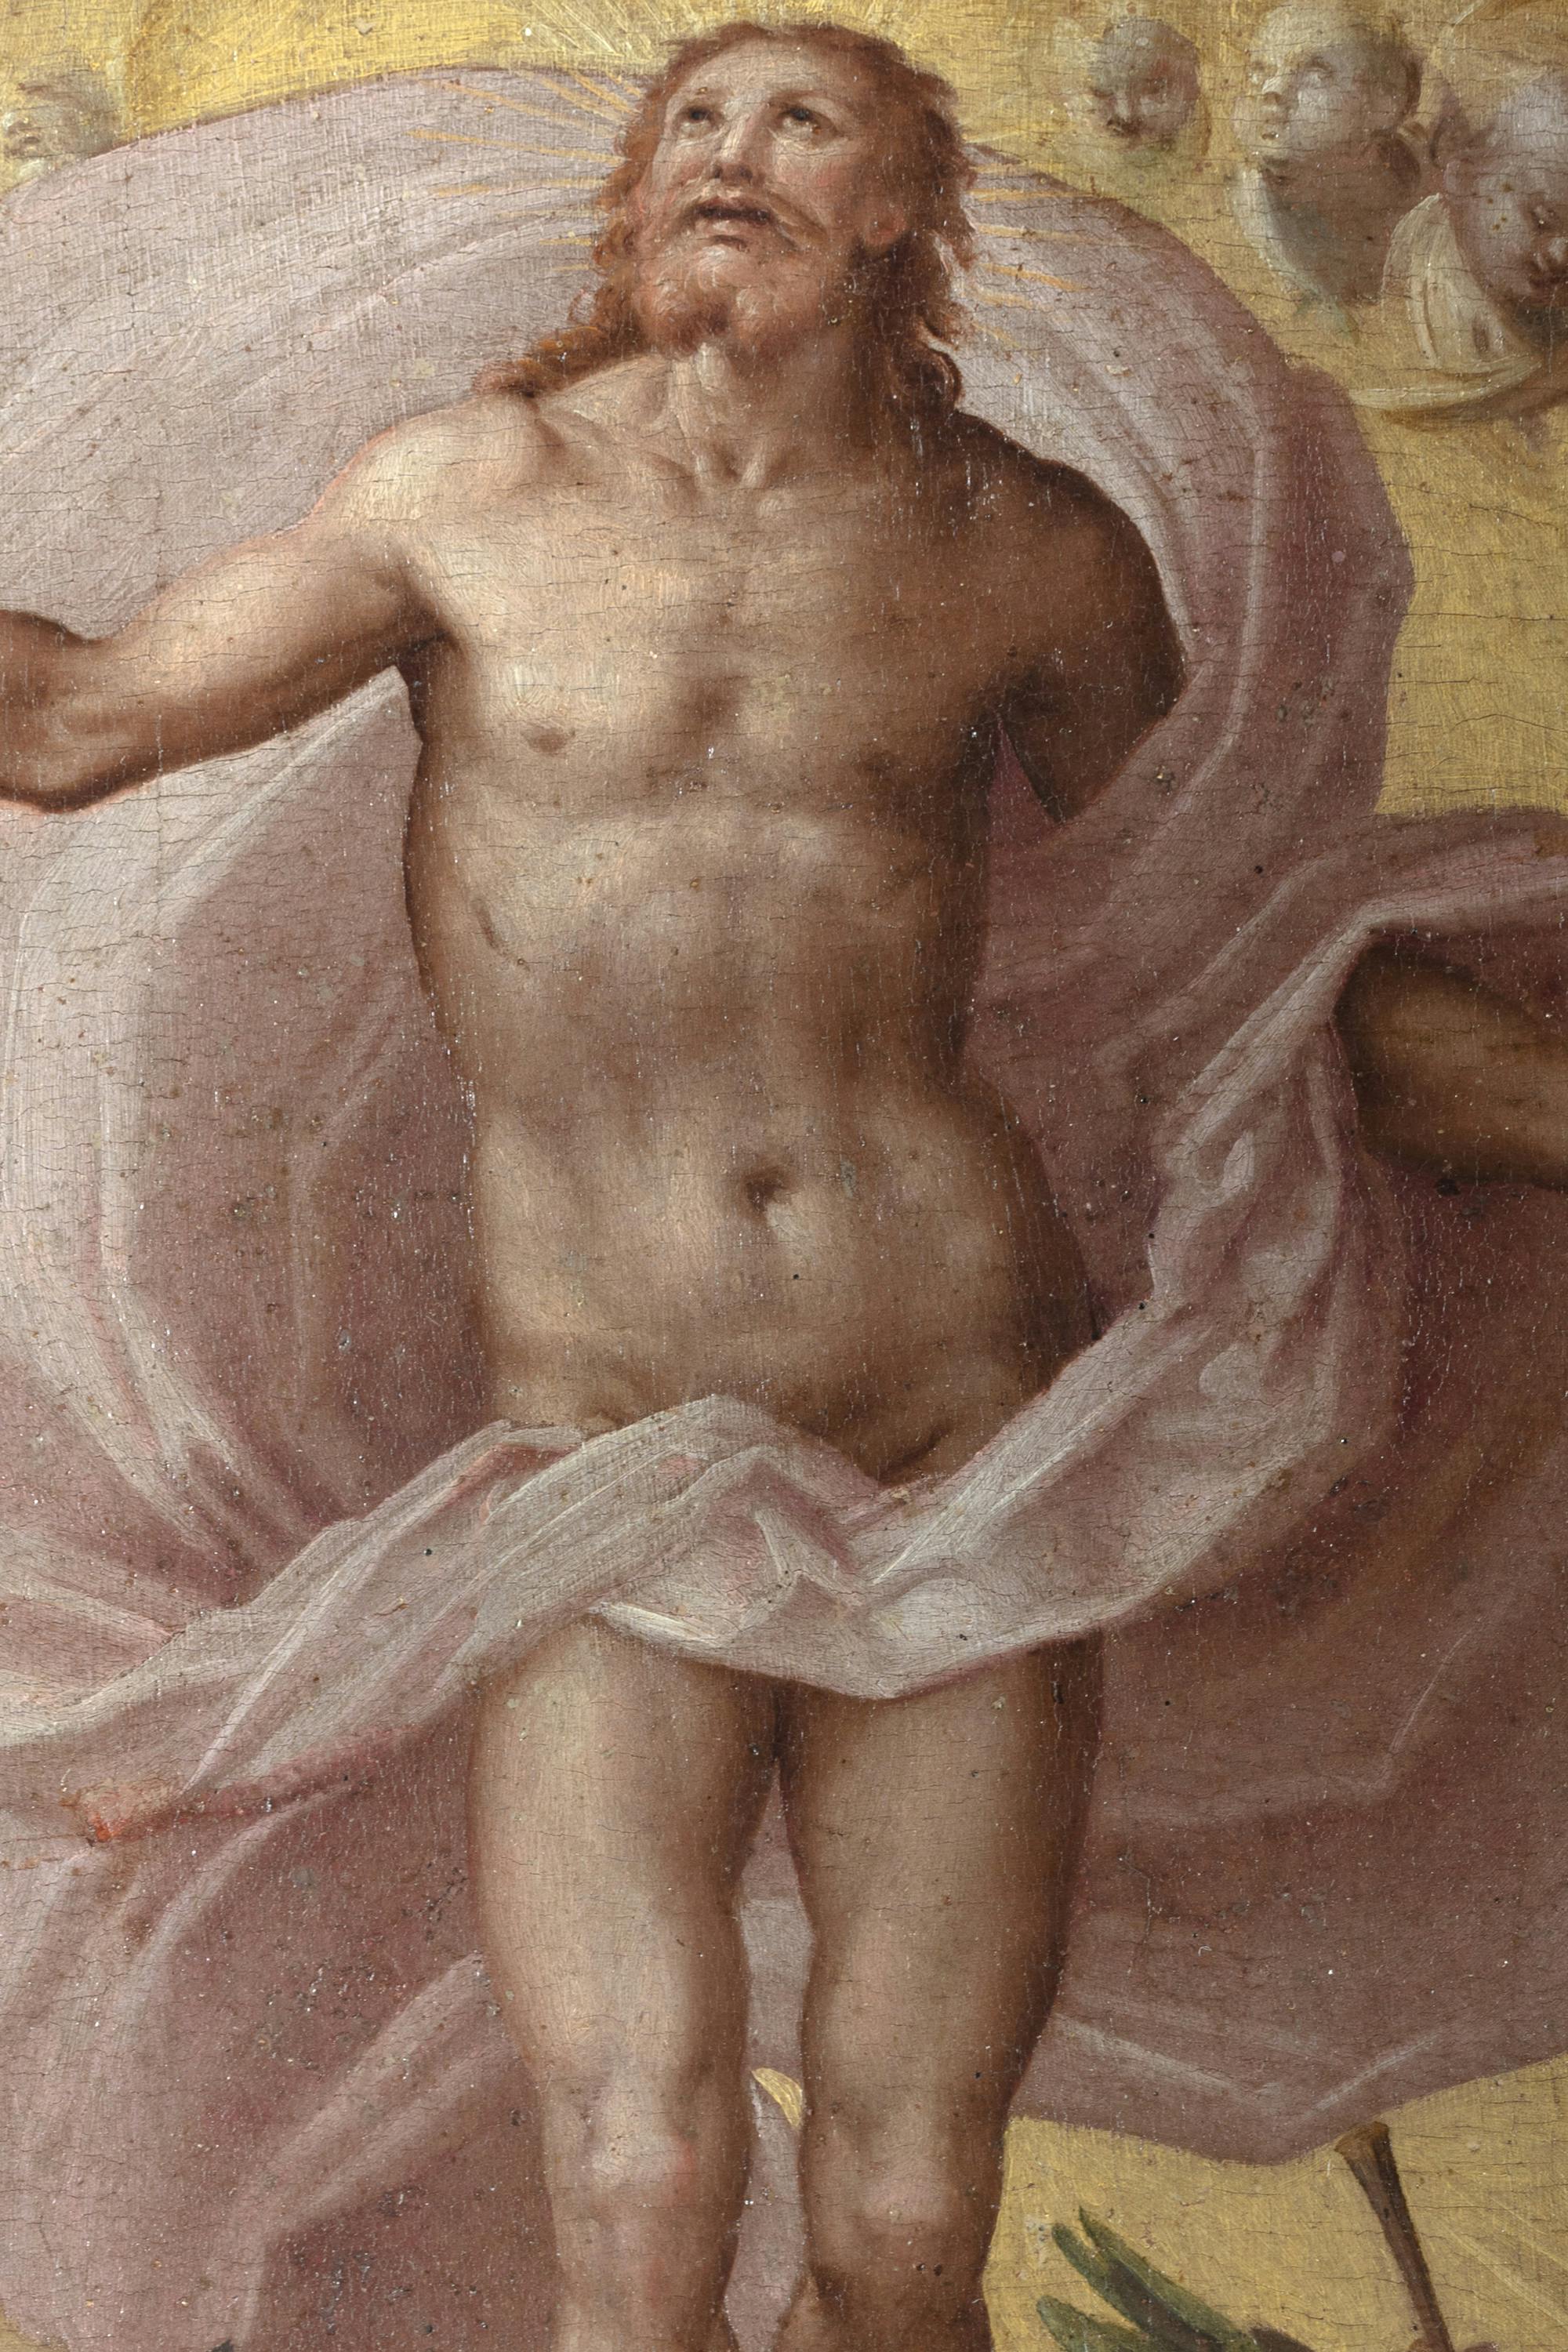 A gem of 16th-century painting joins the Uffizi